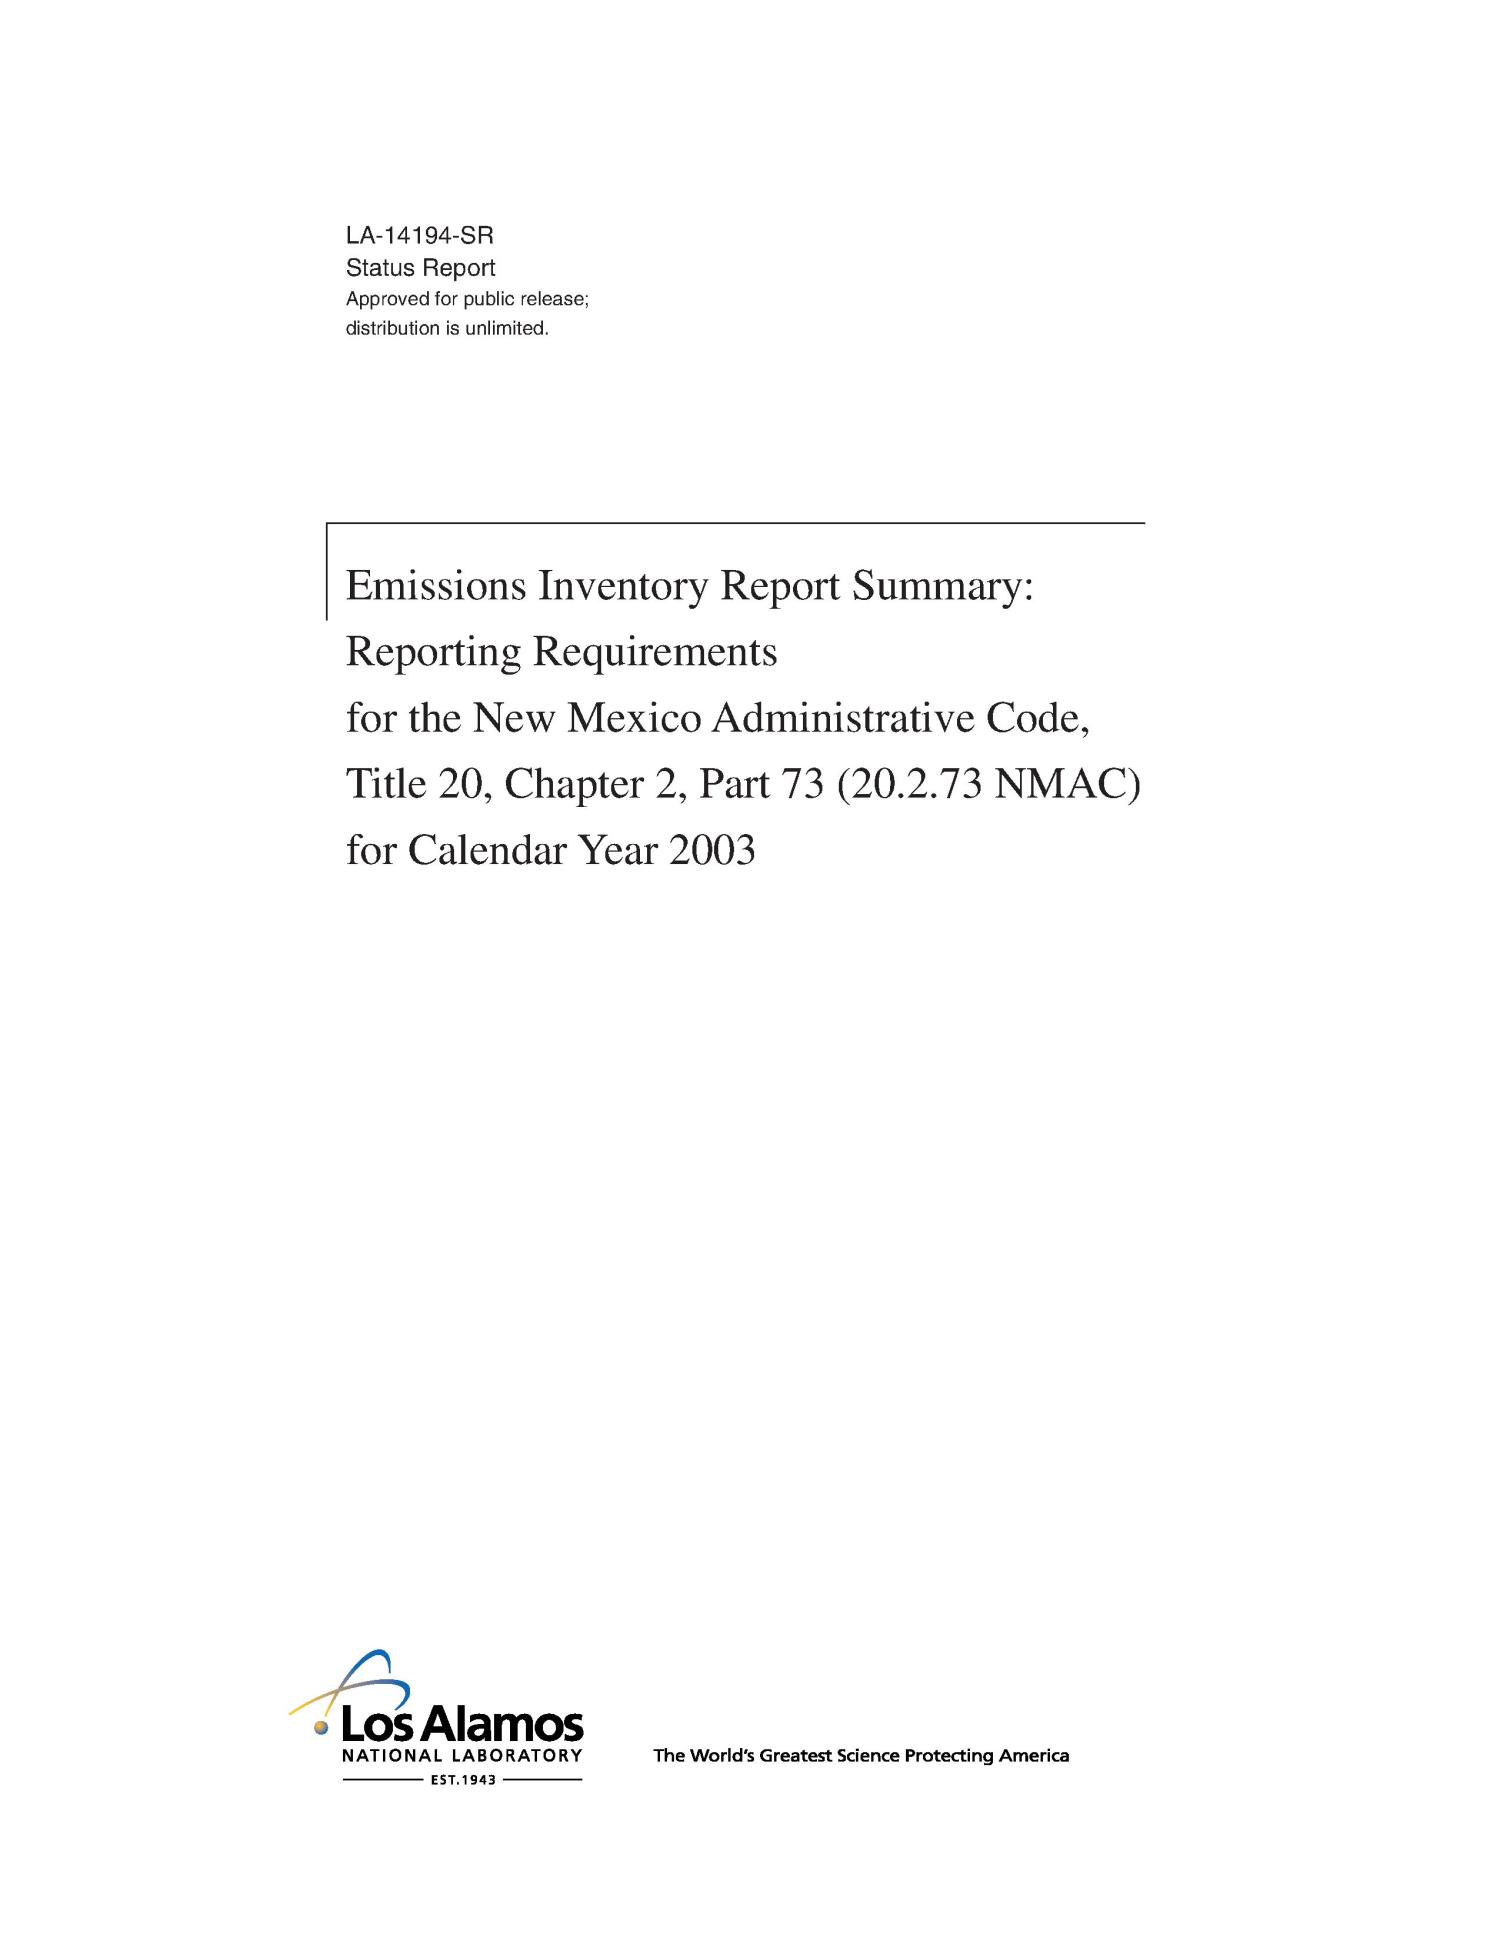 Emissions Inventory Report Summary: Reporting Requirements for the New